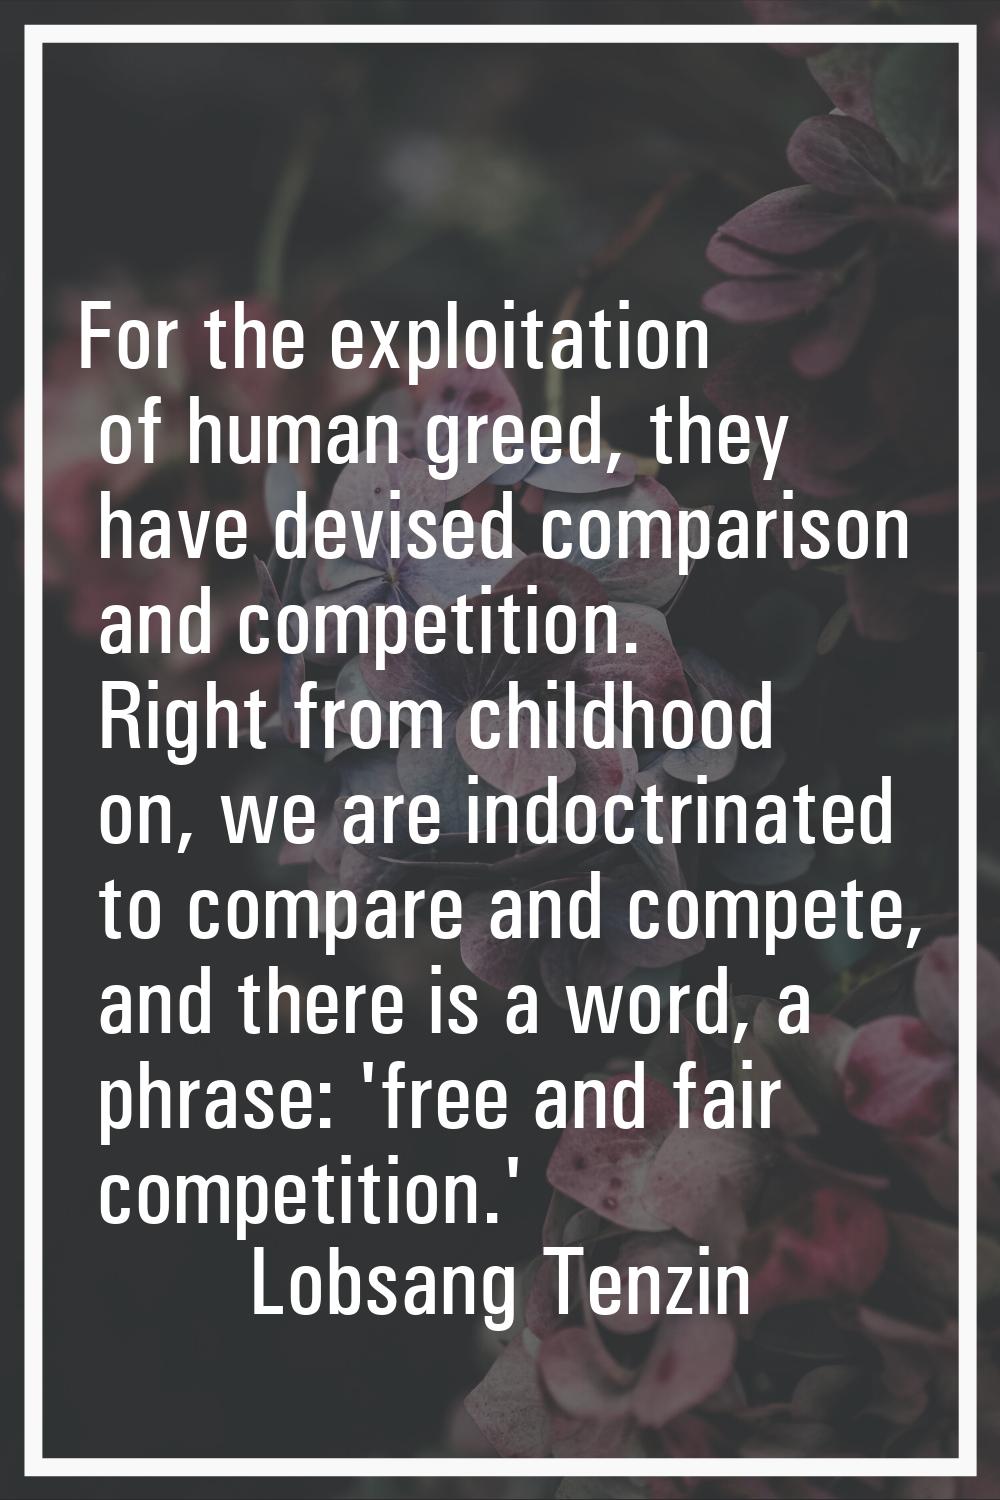 For the exploitation of human greed, they have devised comparison and competition. Right from child